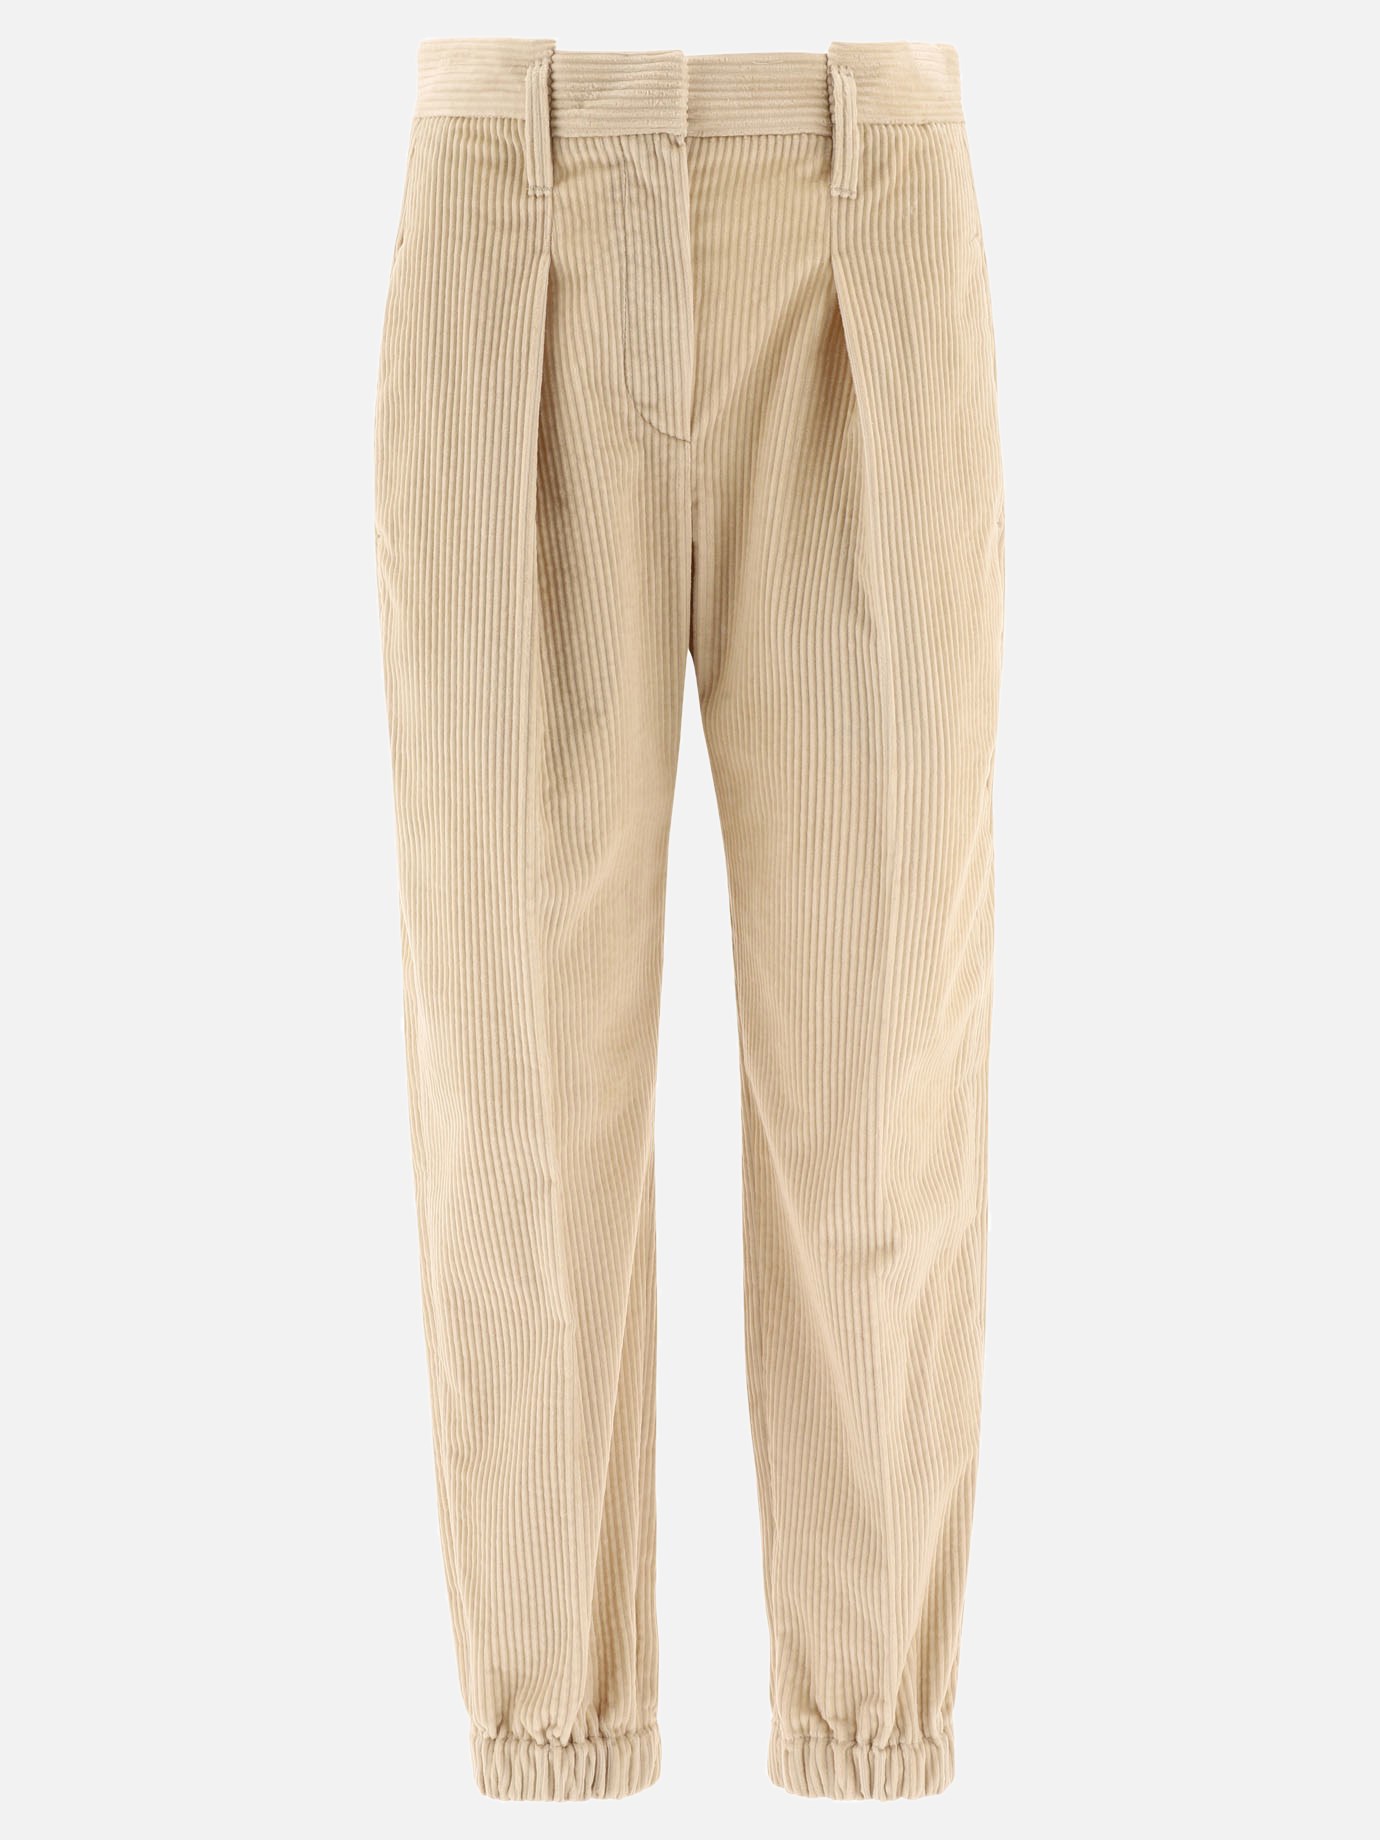 Ribbed stretch trousersby Brunello Cucinelli - 0